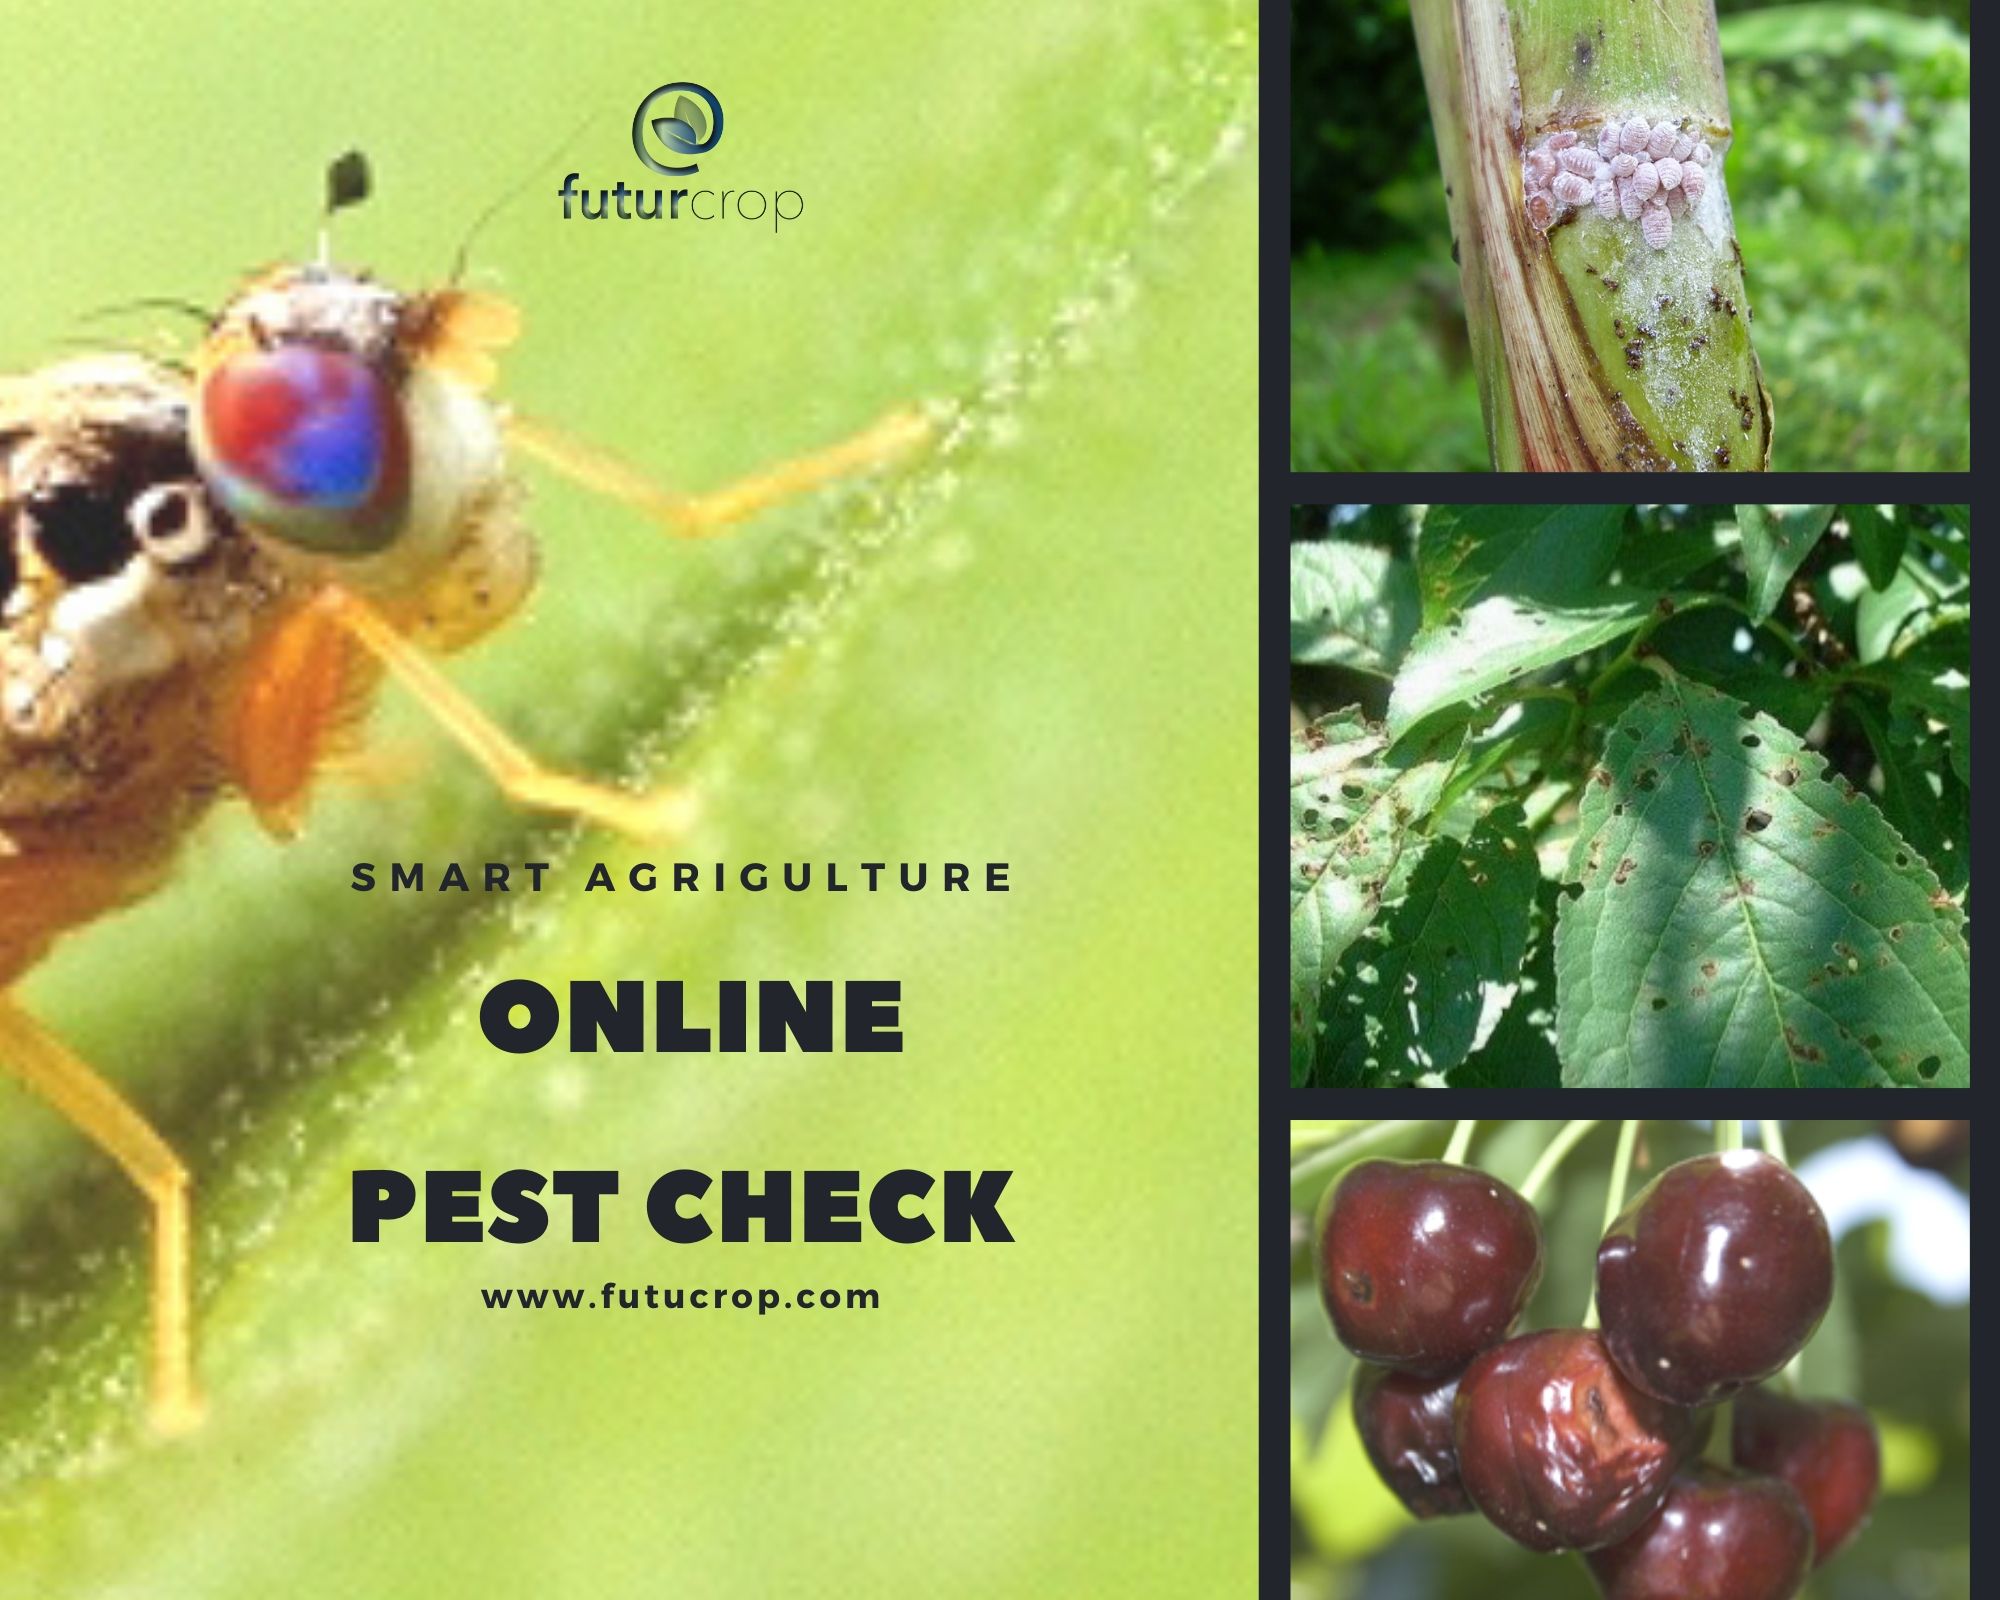 Online pest identification tool, by type of crop damage.